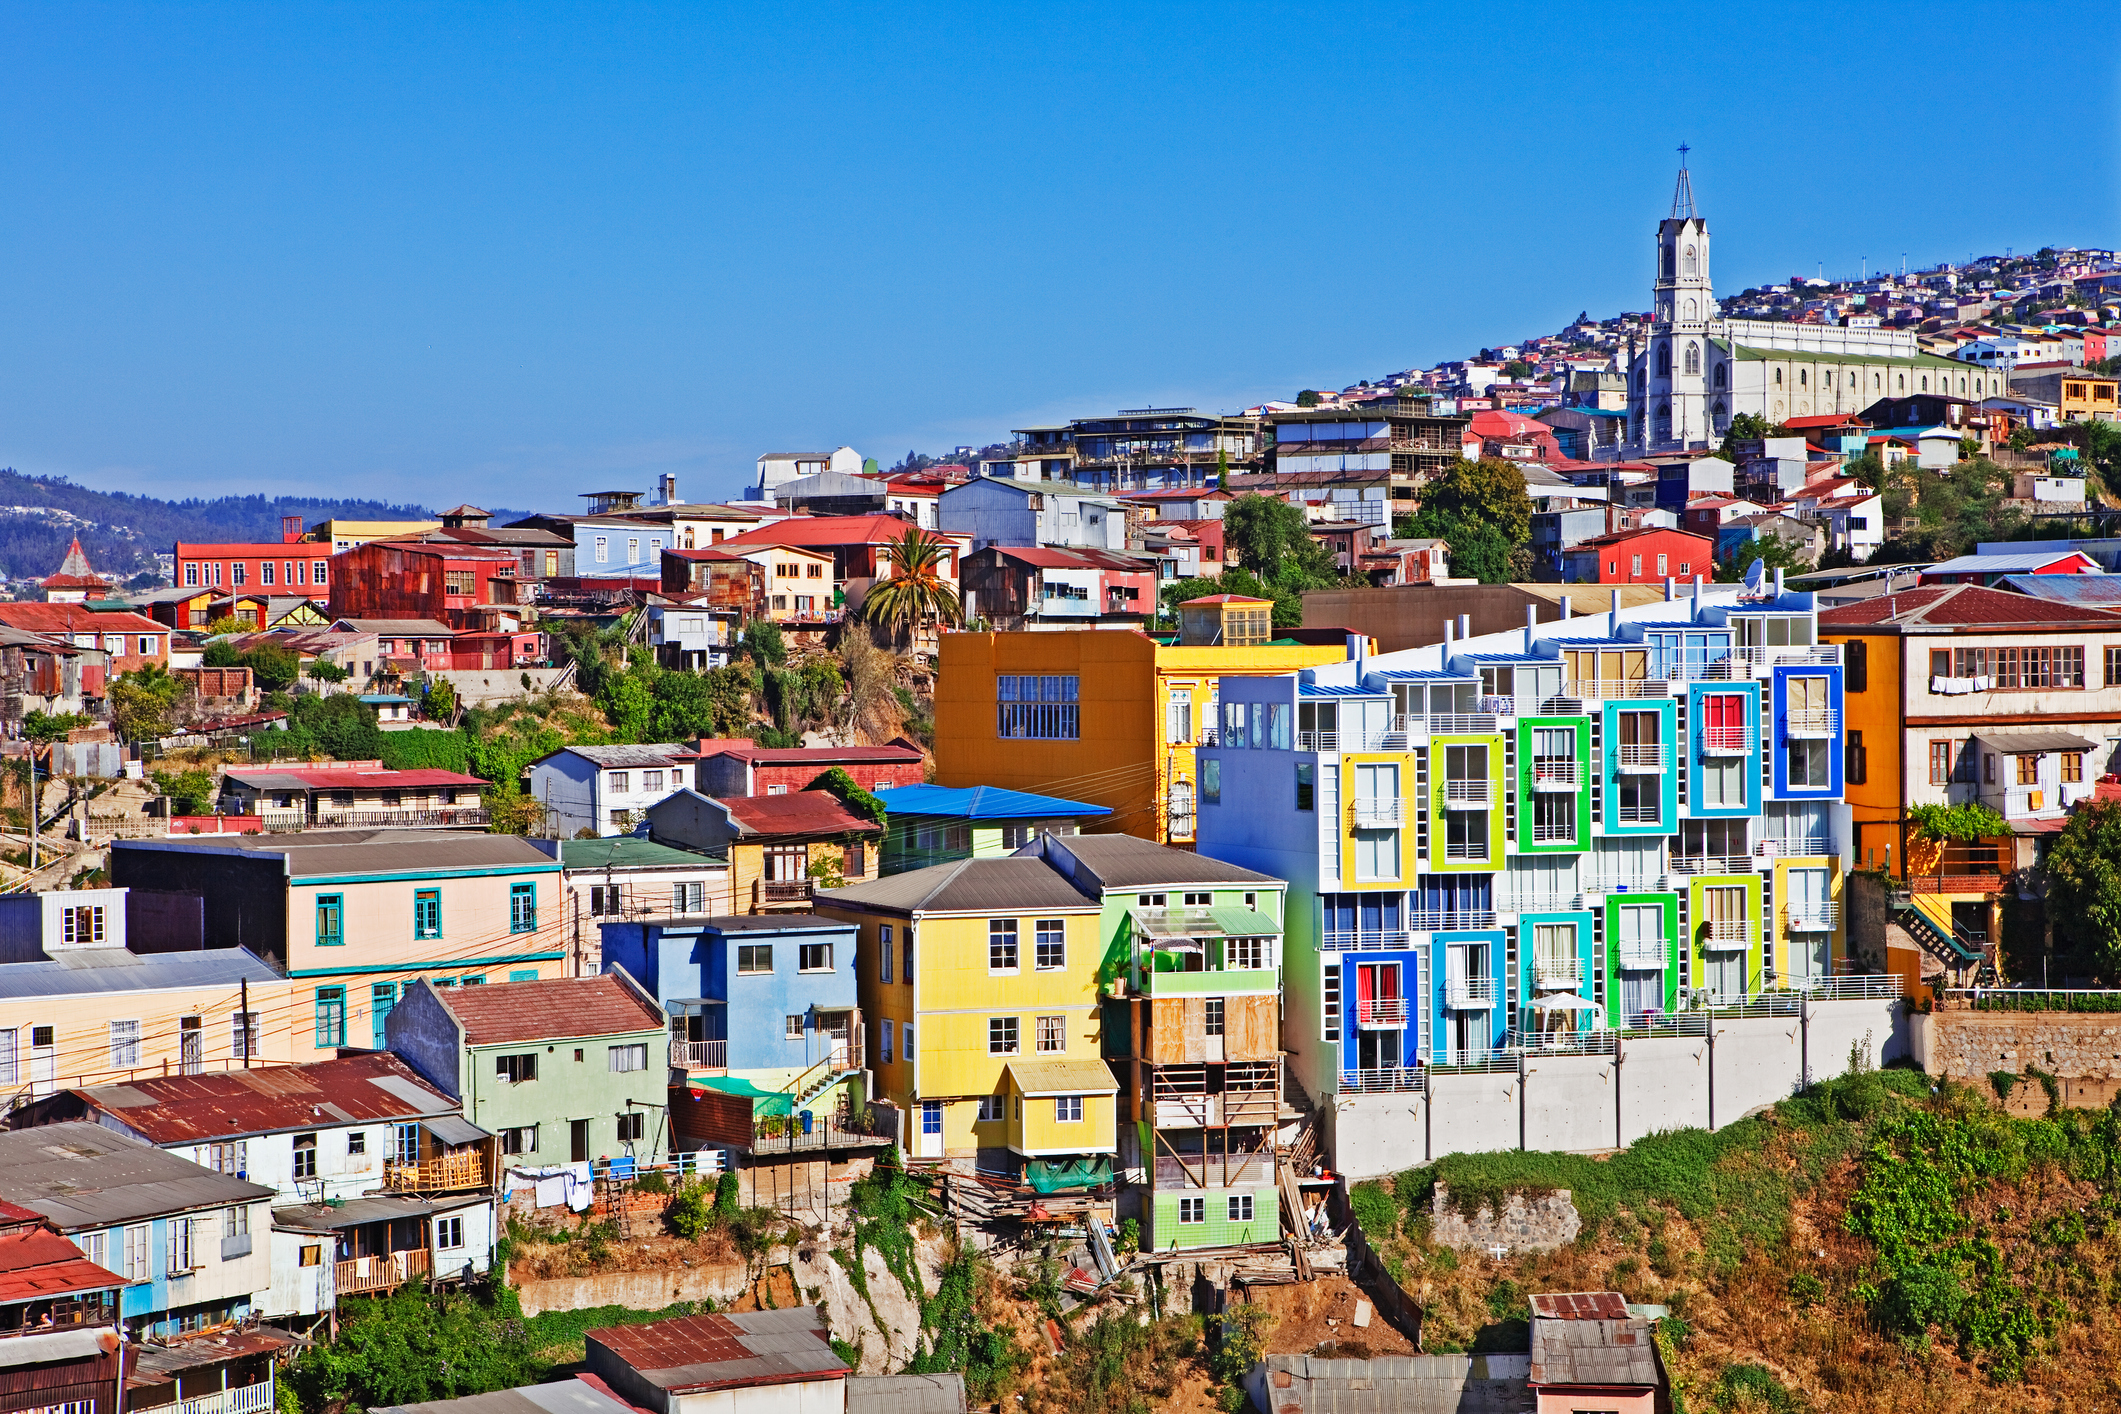 An ariel view of view of Valparaíso, Chile